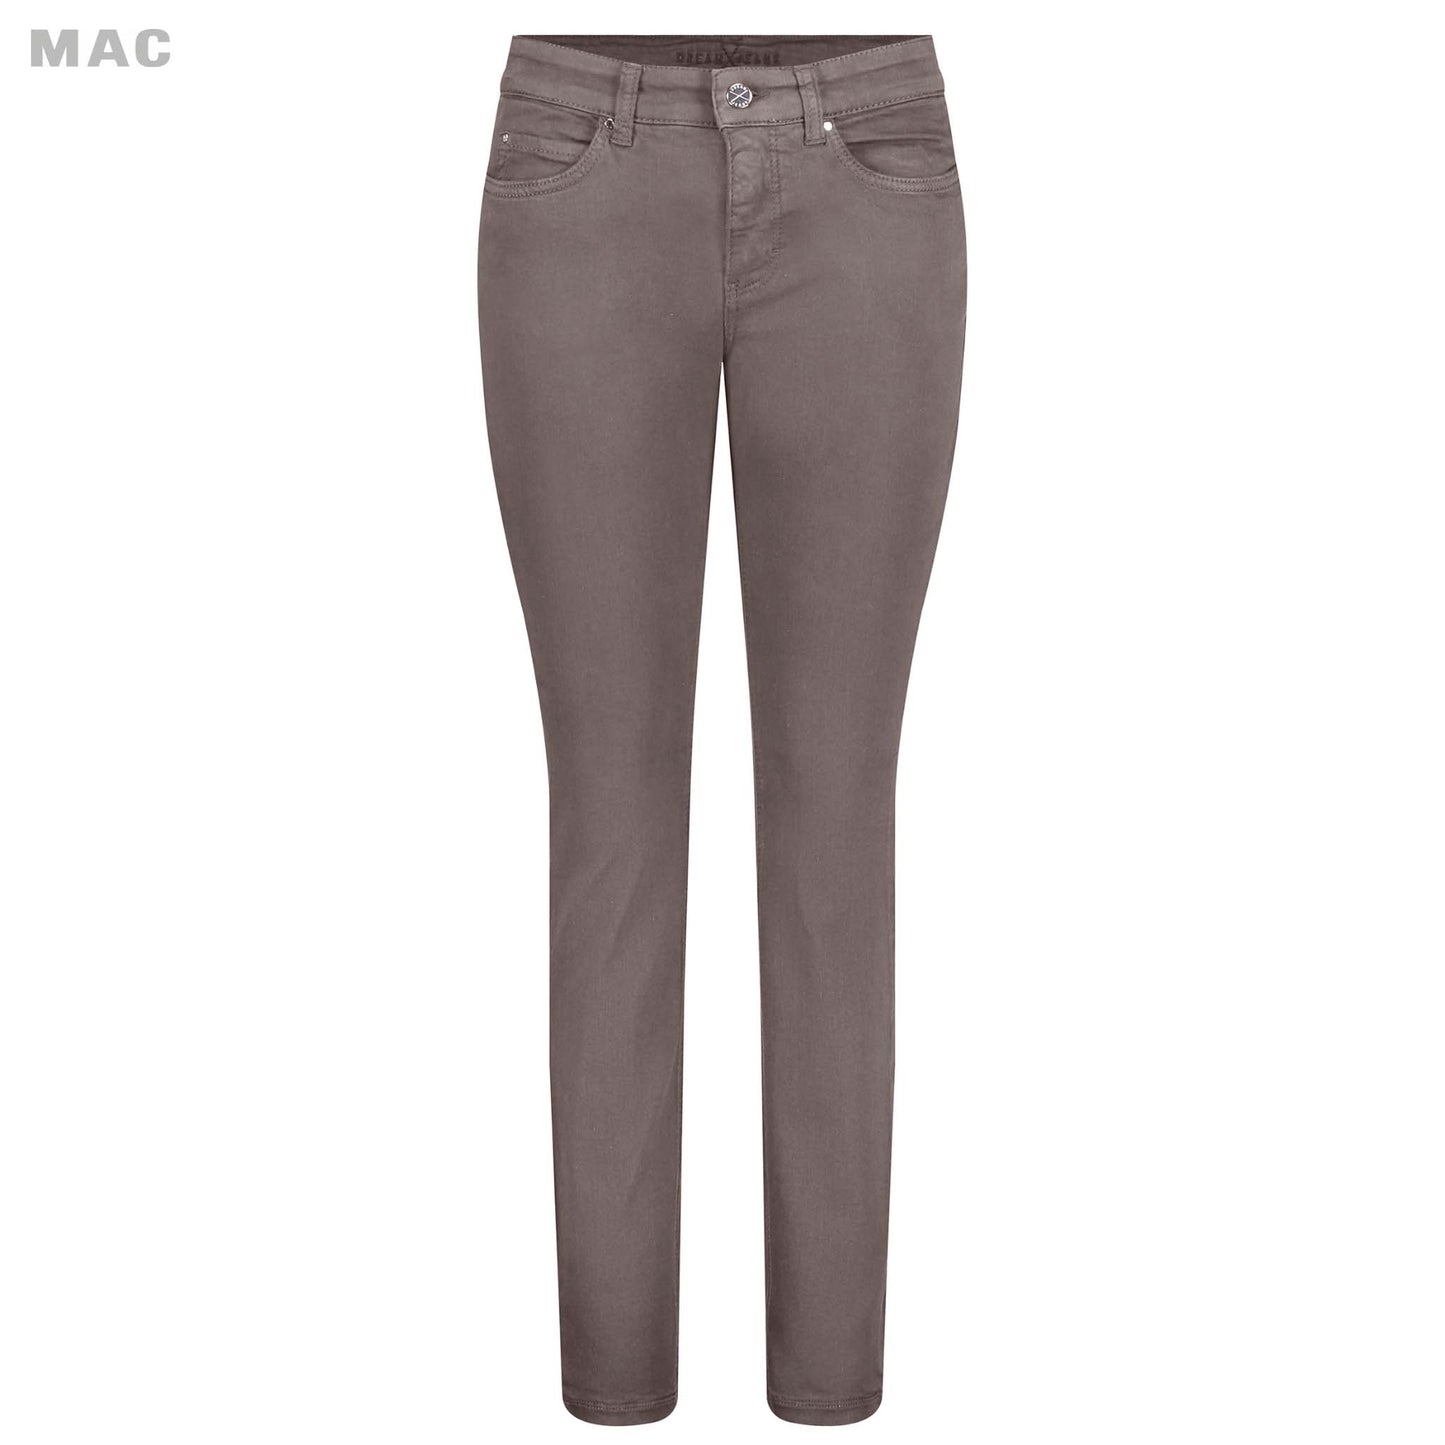 clothing tall women mac jeans dream skinny gray taupe